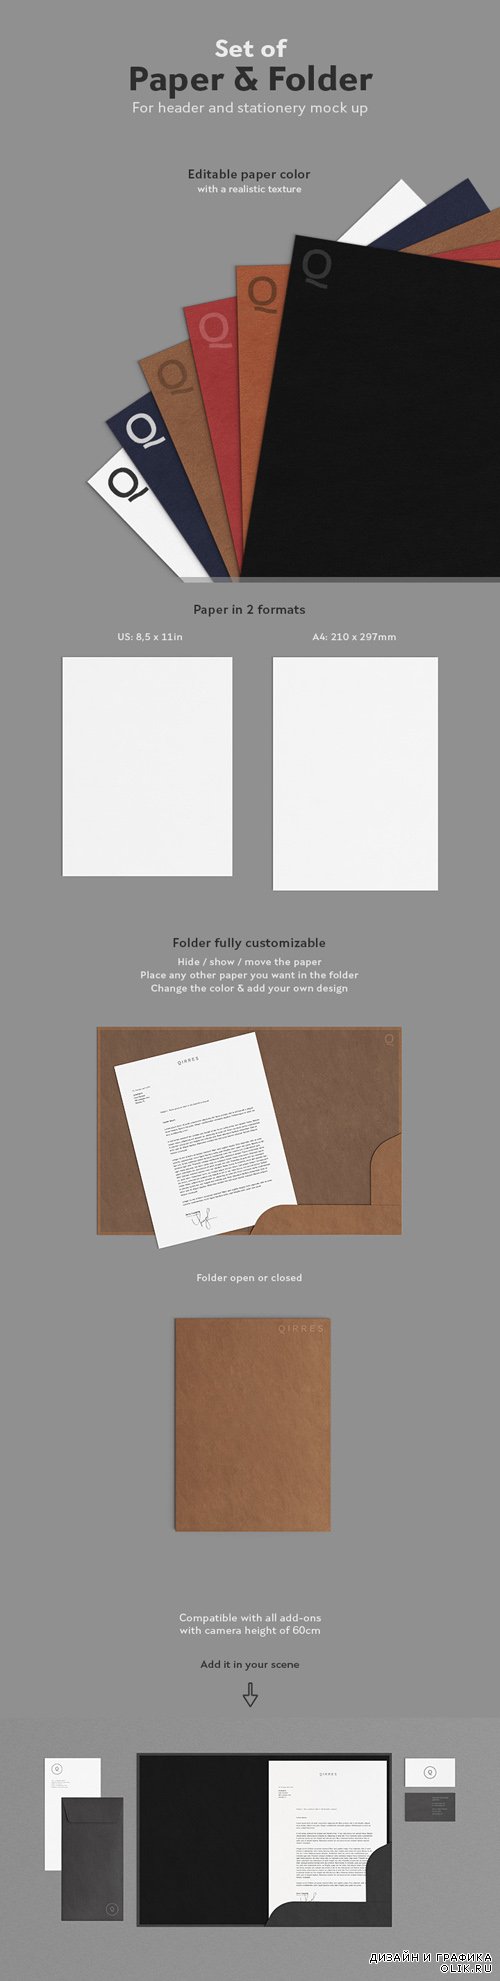 PSD - Add-On Letterhead Mock up with Papers